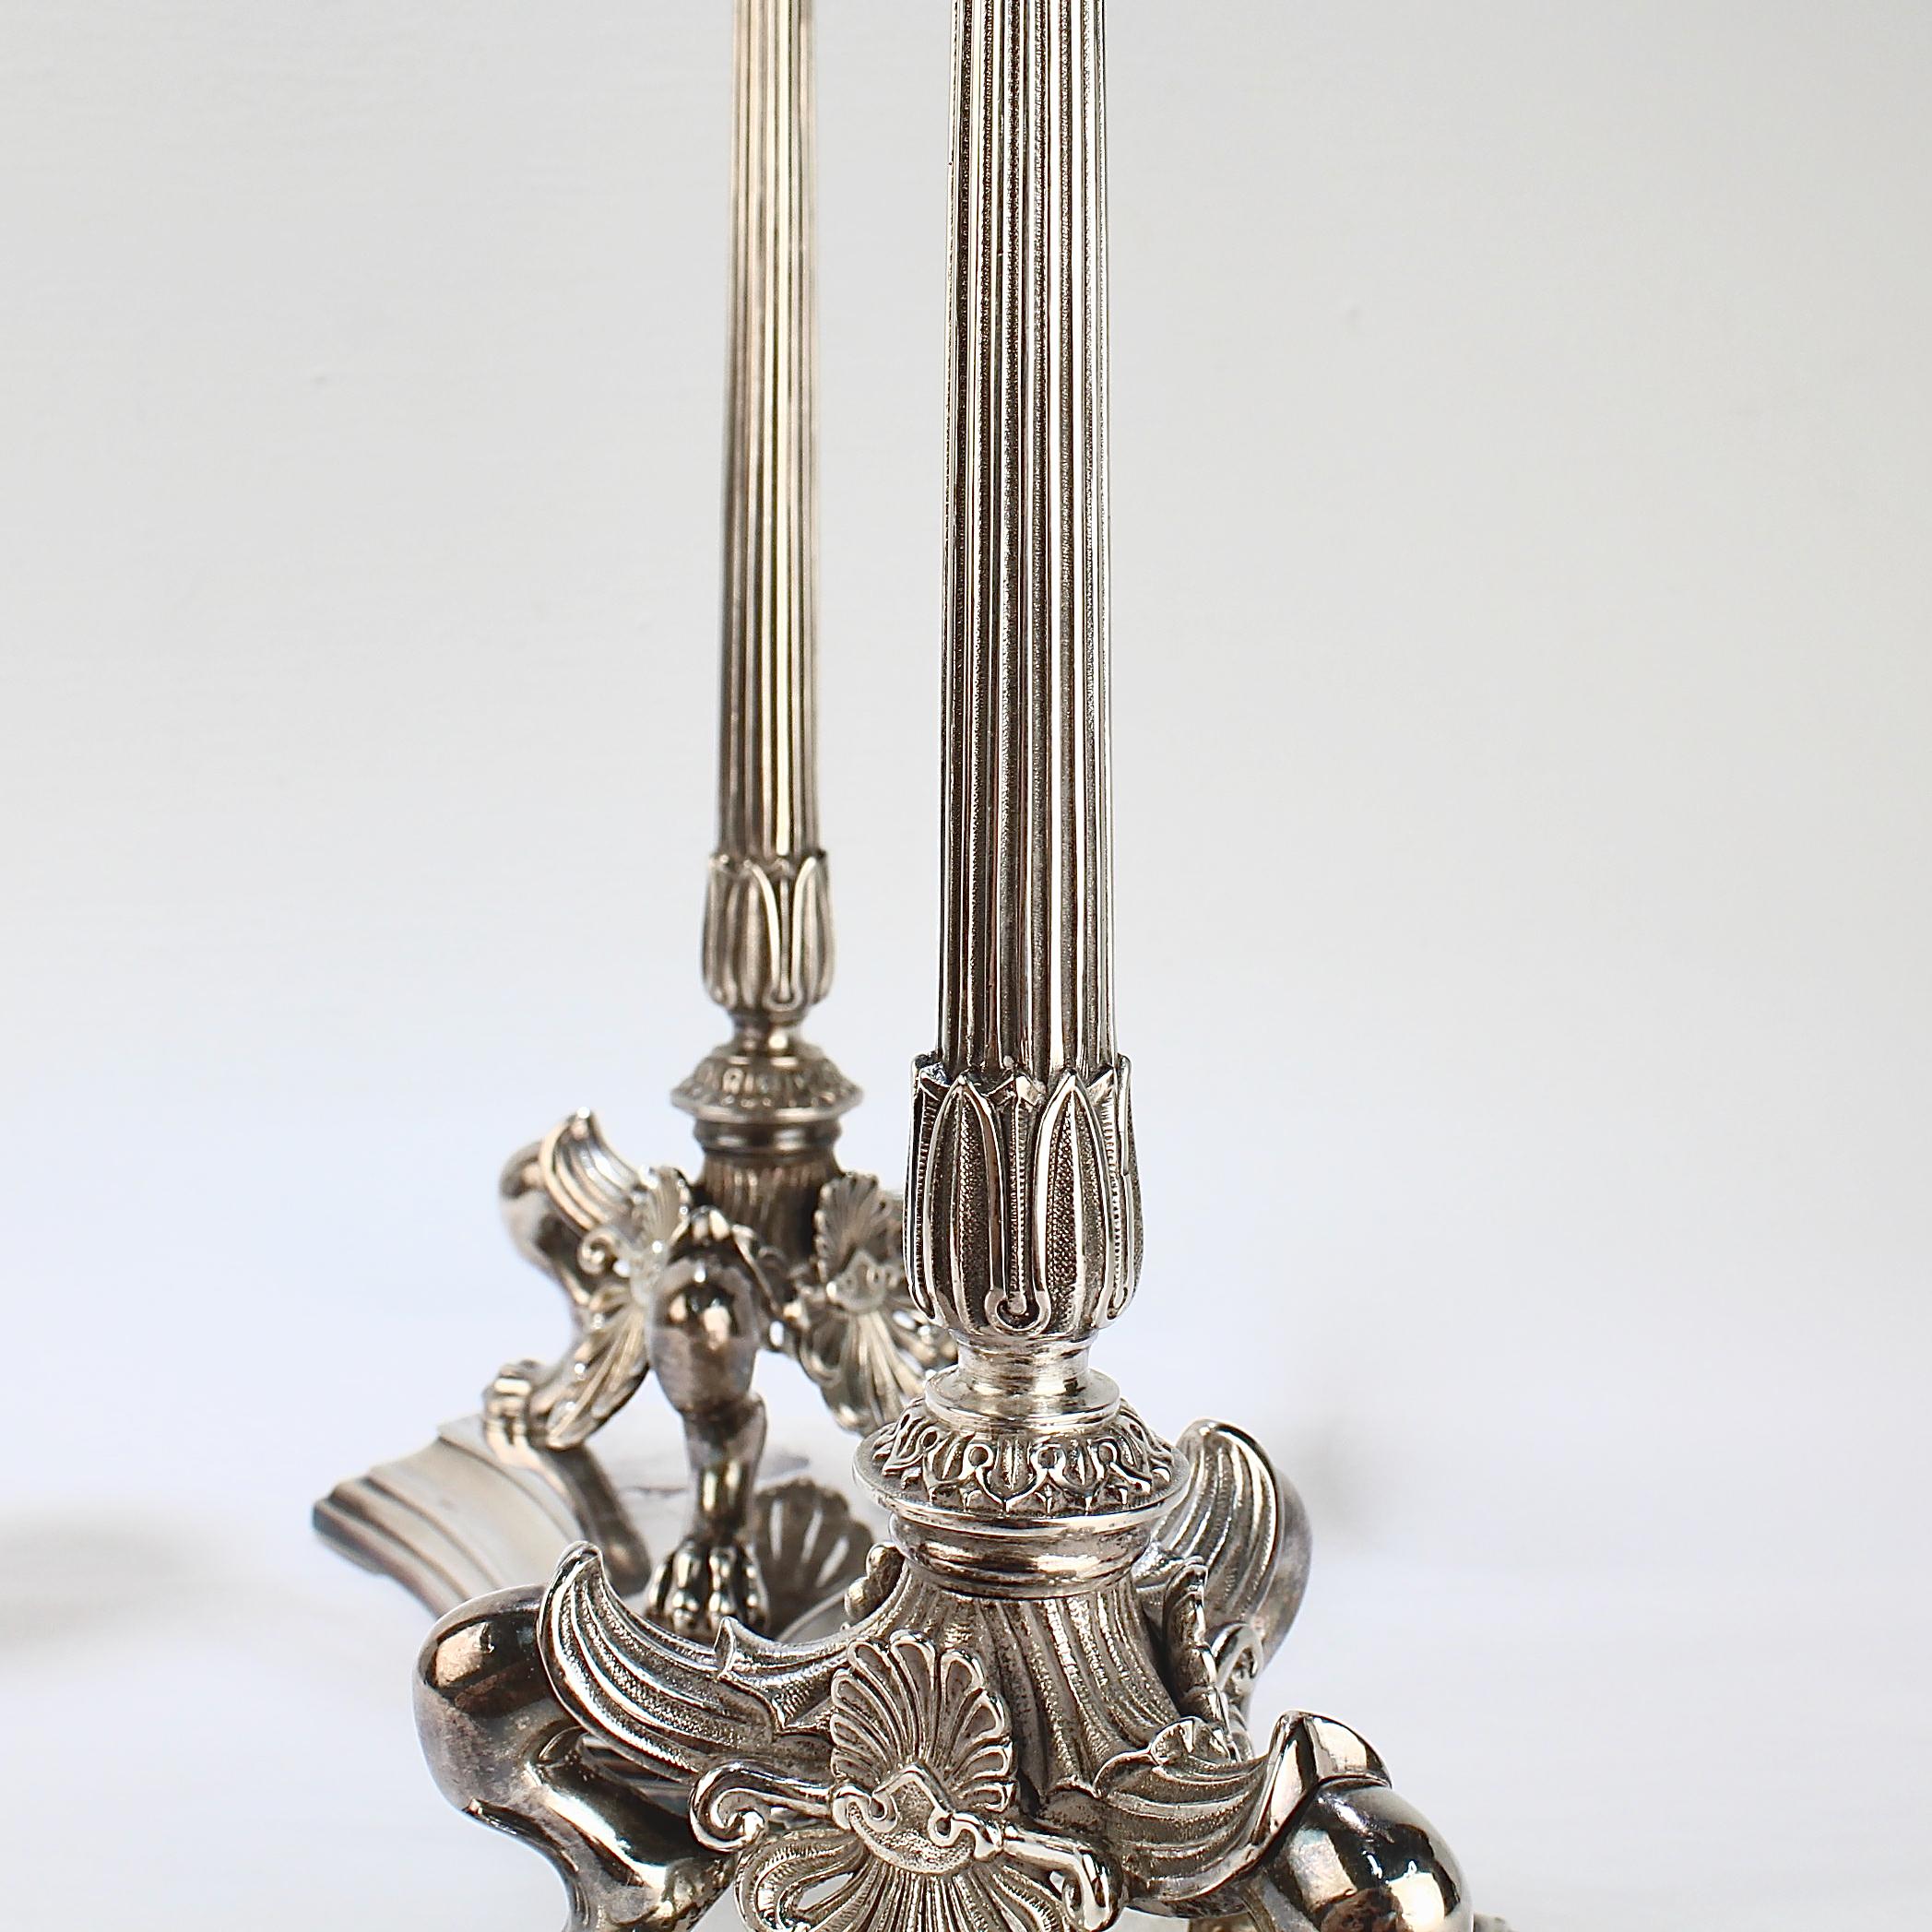 Pair of Elkington & Co Neoclassical Revival Silver Plated Five-Light Candelabra For Sale 4